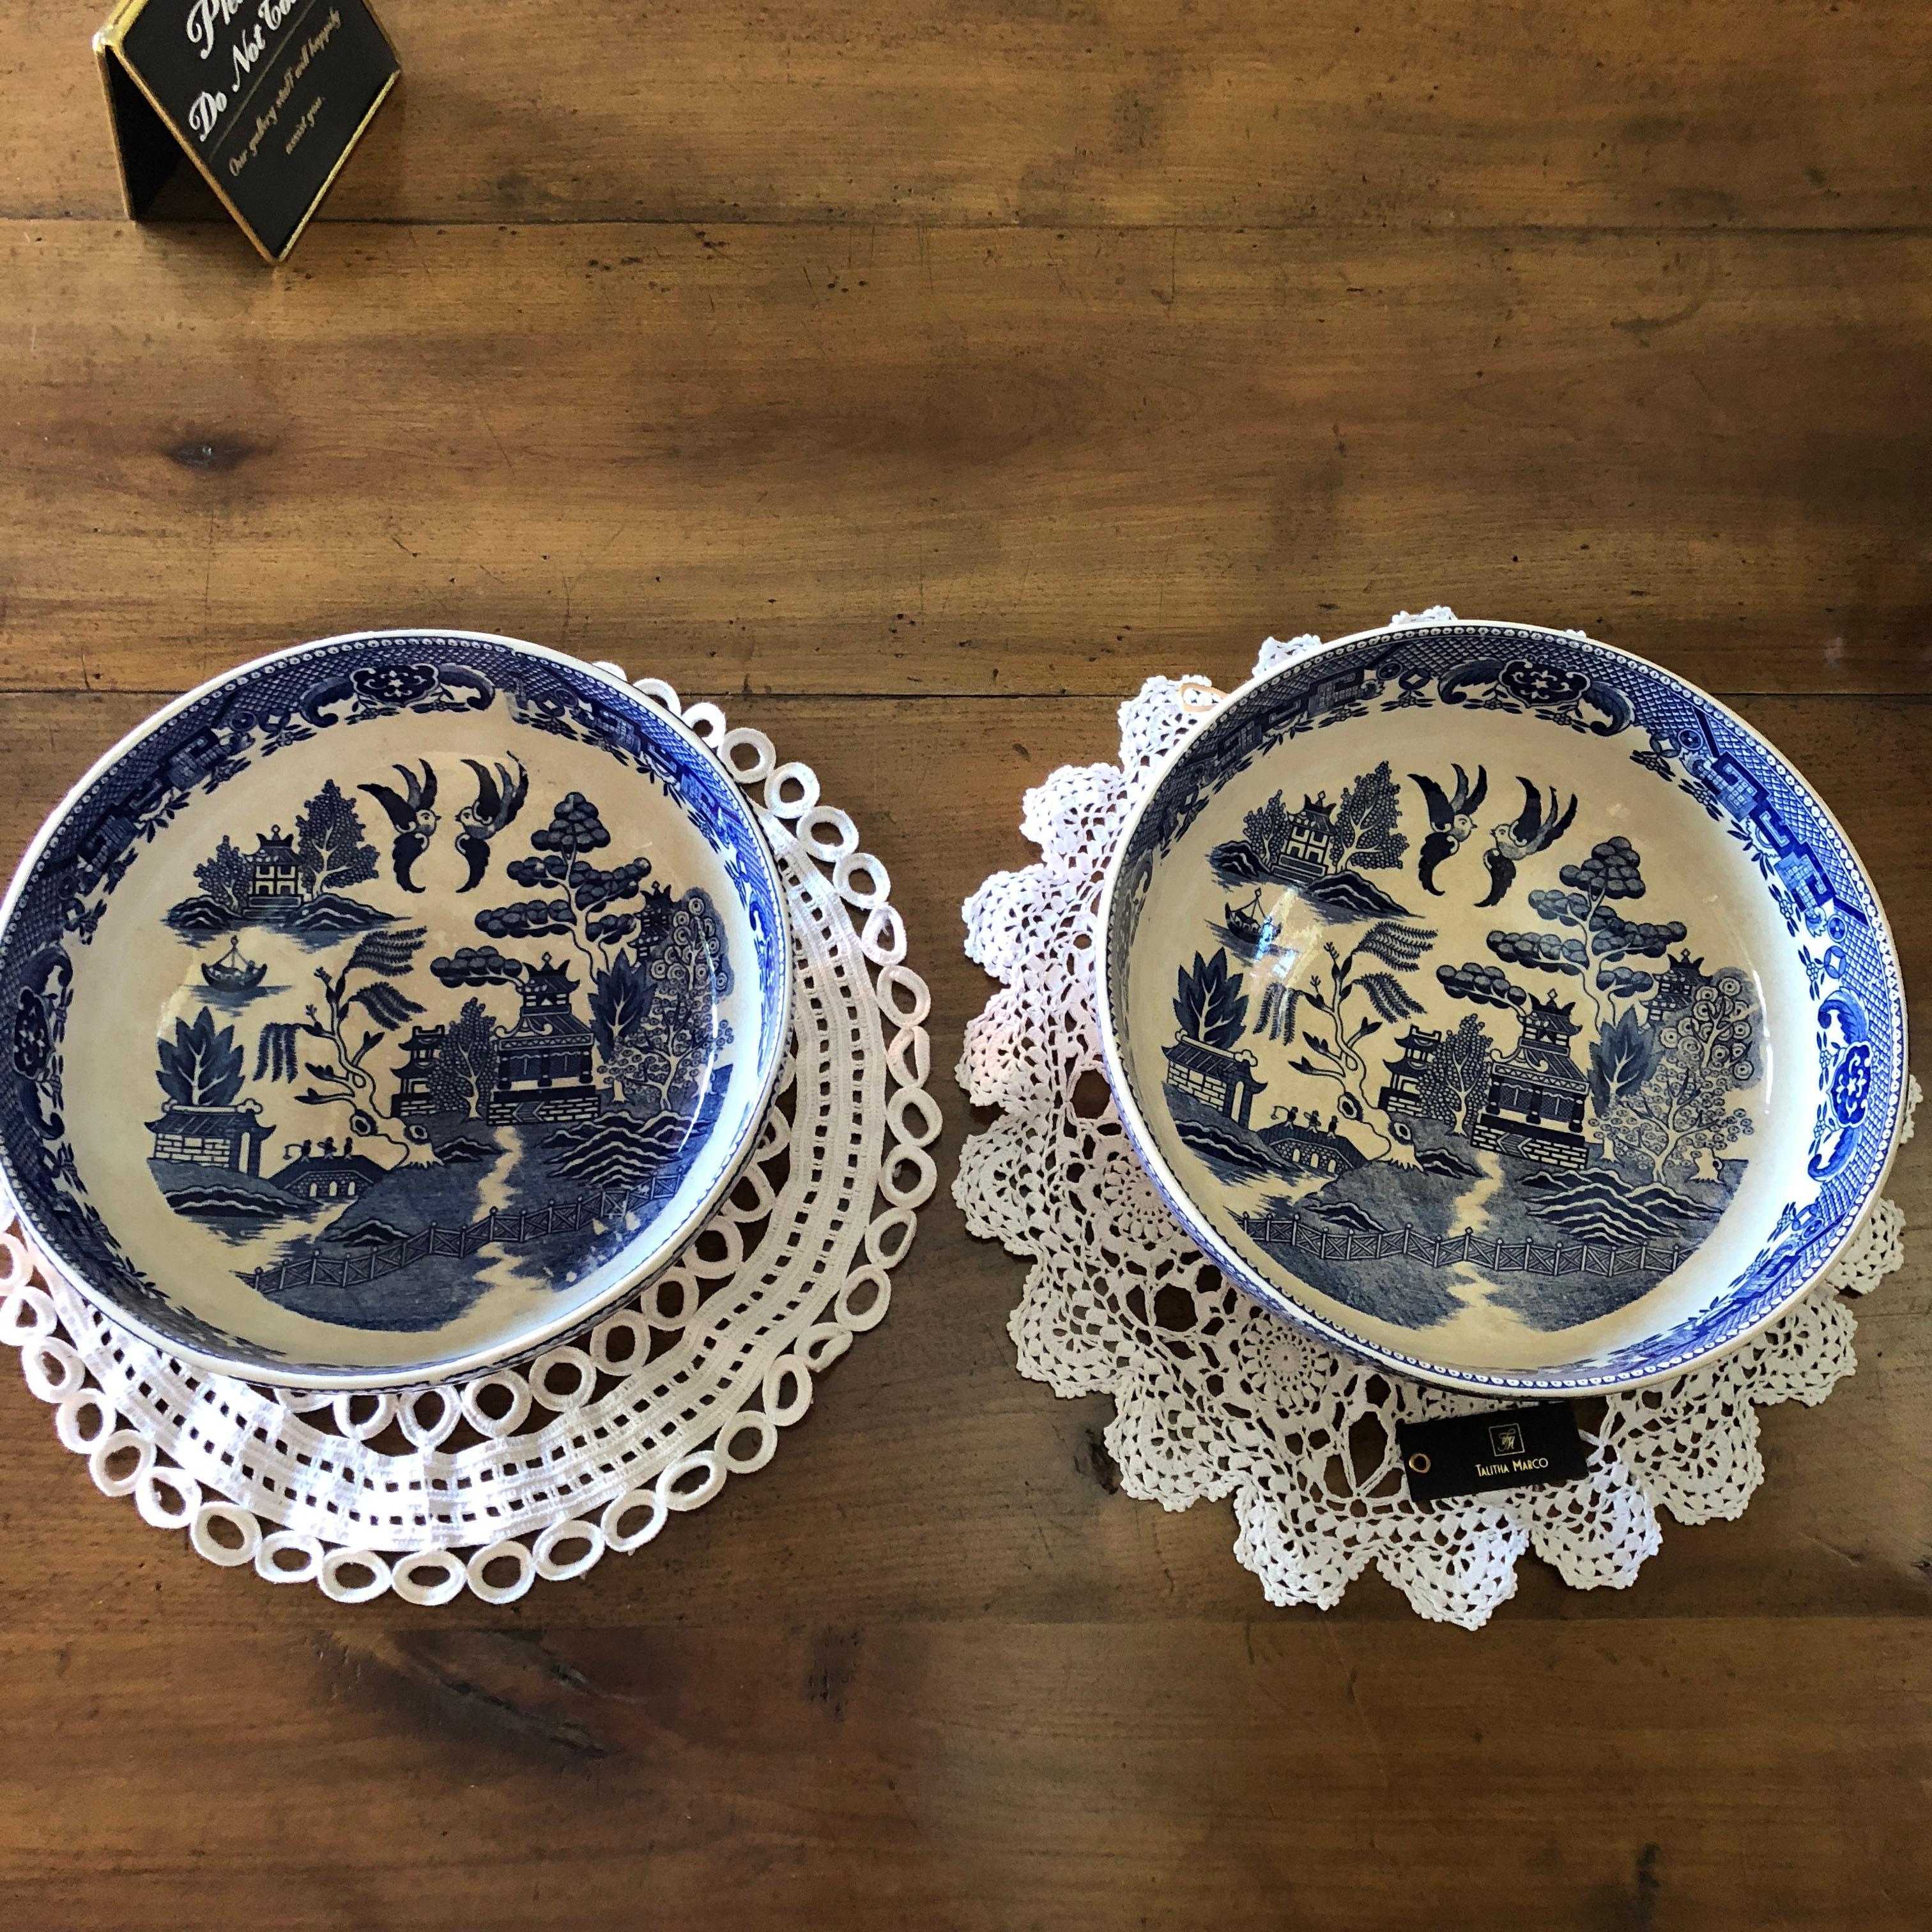 This exquisite pair of matching antique Japanese porcelain bowls, feature blue and white hand painted traditional willow scenes with delicate traditional Japanese geometric bordering. A beautiful pair of Japanese, collectable porcelain that remain